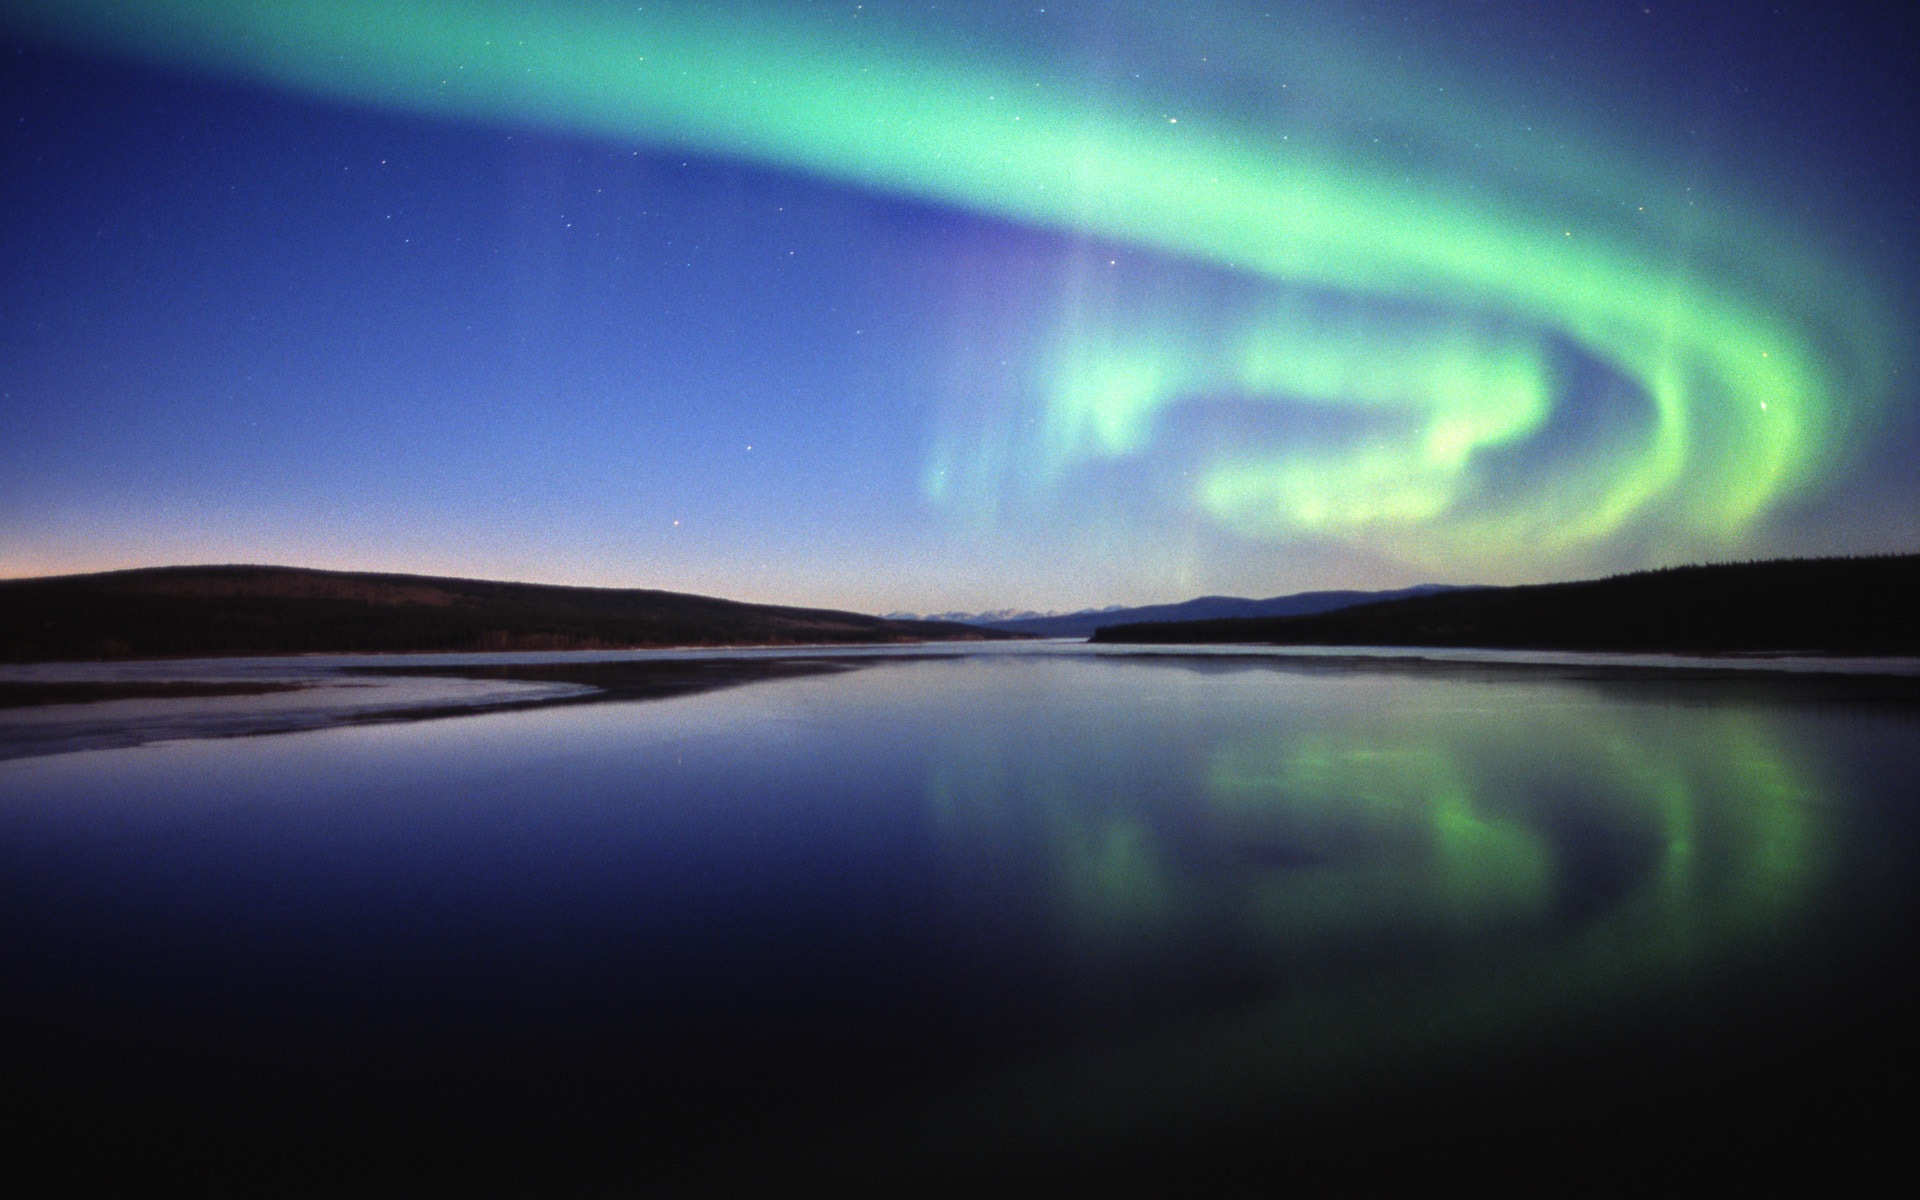 Natural wonders of the Northern Lights HD Wallpaper (2) #15 - 1920x1200